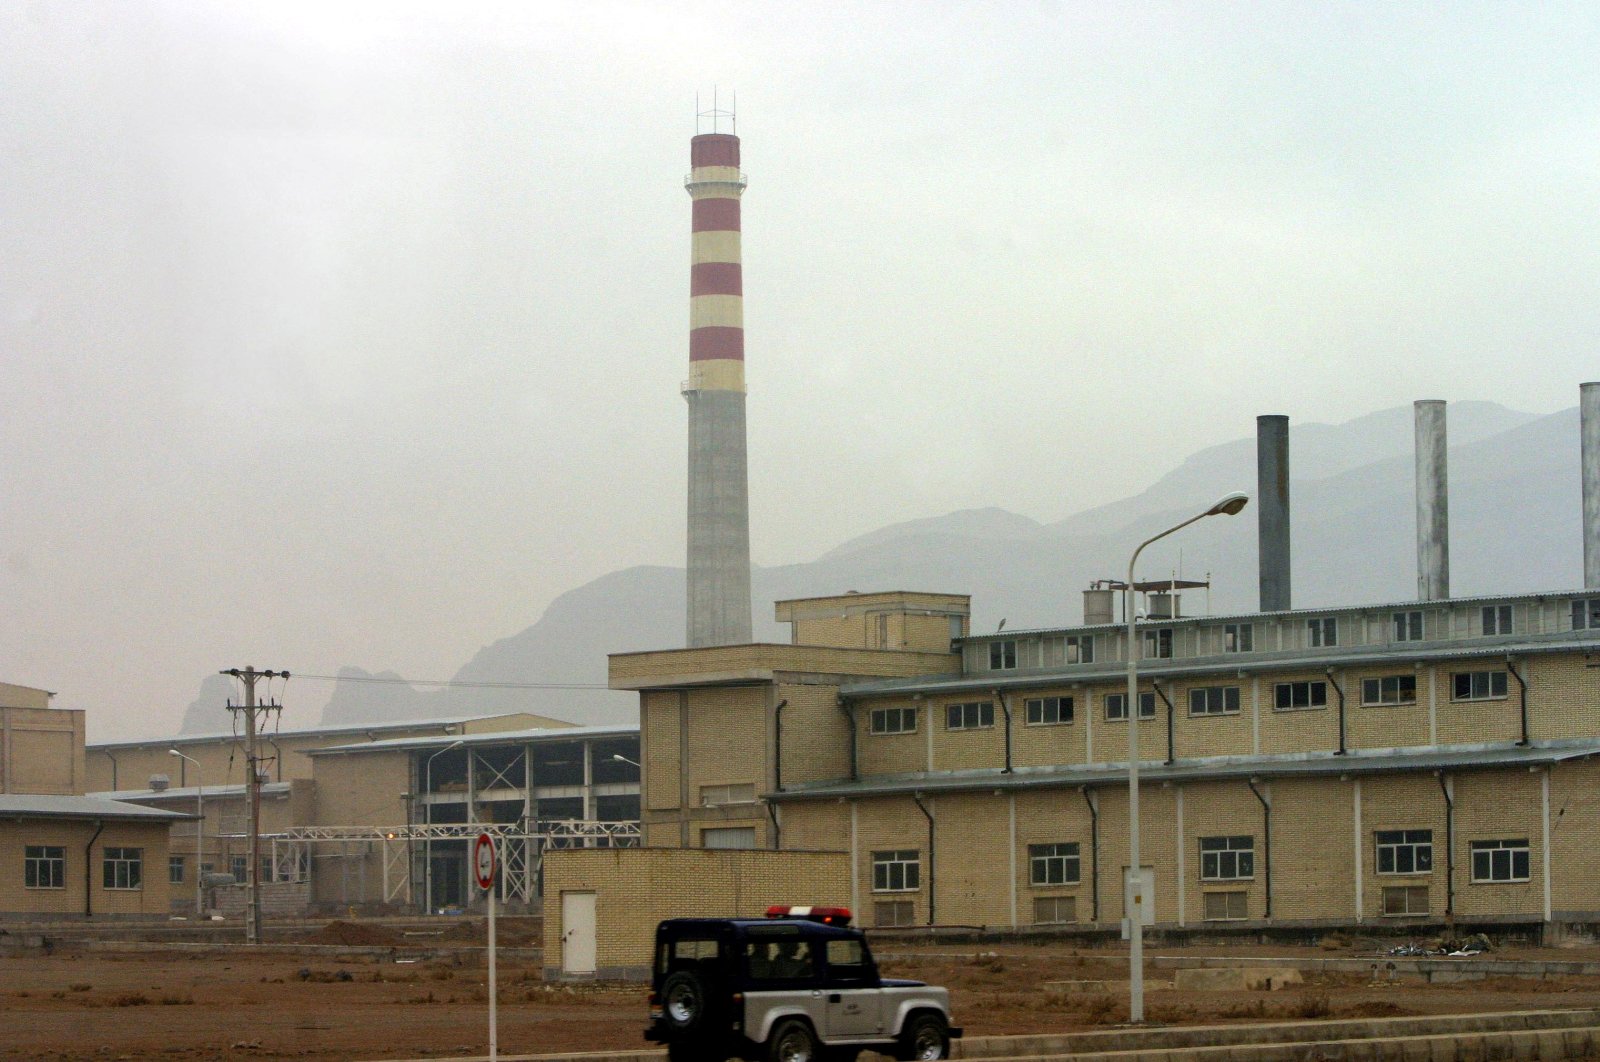 A security car passes in front of the Natanz nuclear facility 300 kilometers (186 miles) south of Tehran, Iran, Nov. 20, 2004. (Reuters Photo)